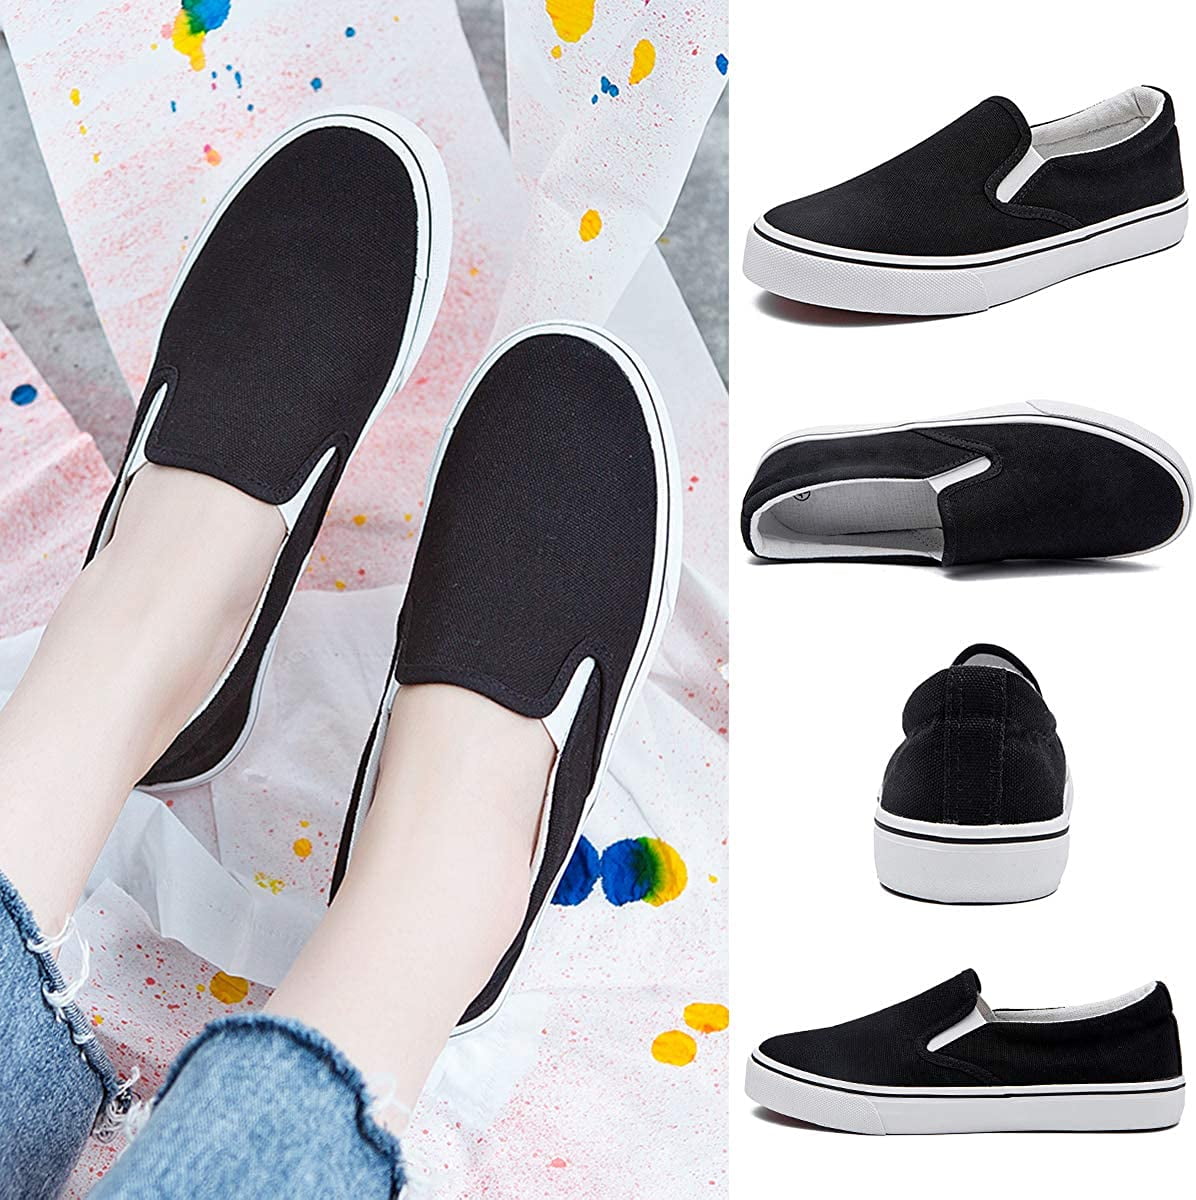  JWSVBF Women's Slip on Sneakers Womens Canvas Slip on Shoes  Fashion Rhinestone Tennis Shoes for Women Black and White Loafers White  Sneakers for Women Slip On : Sports & Outdoors